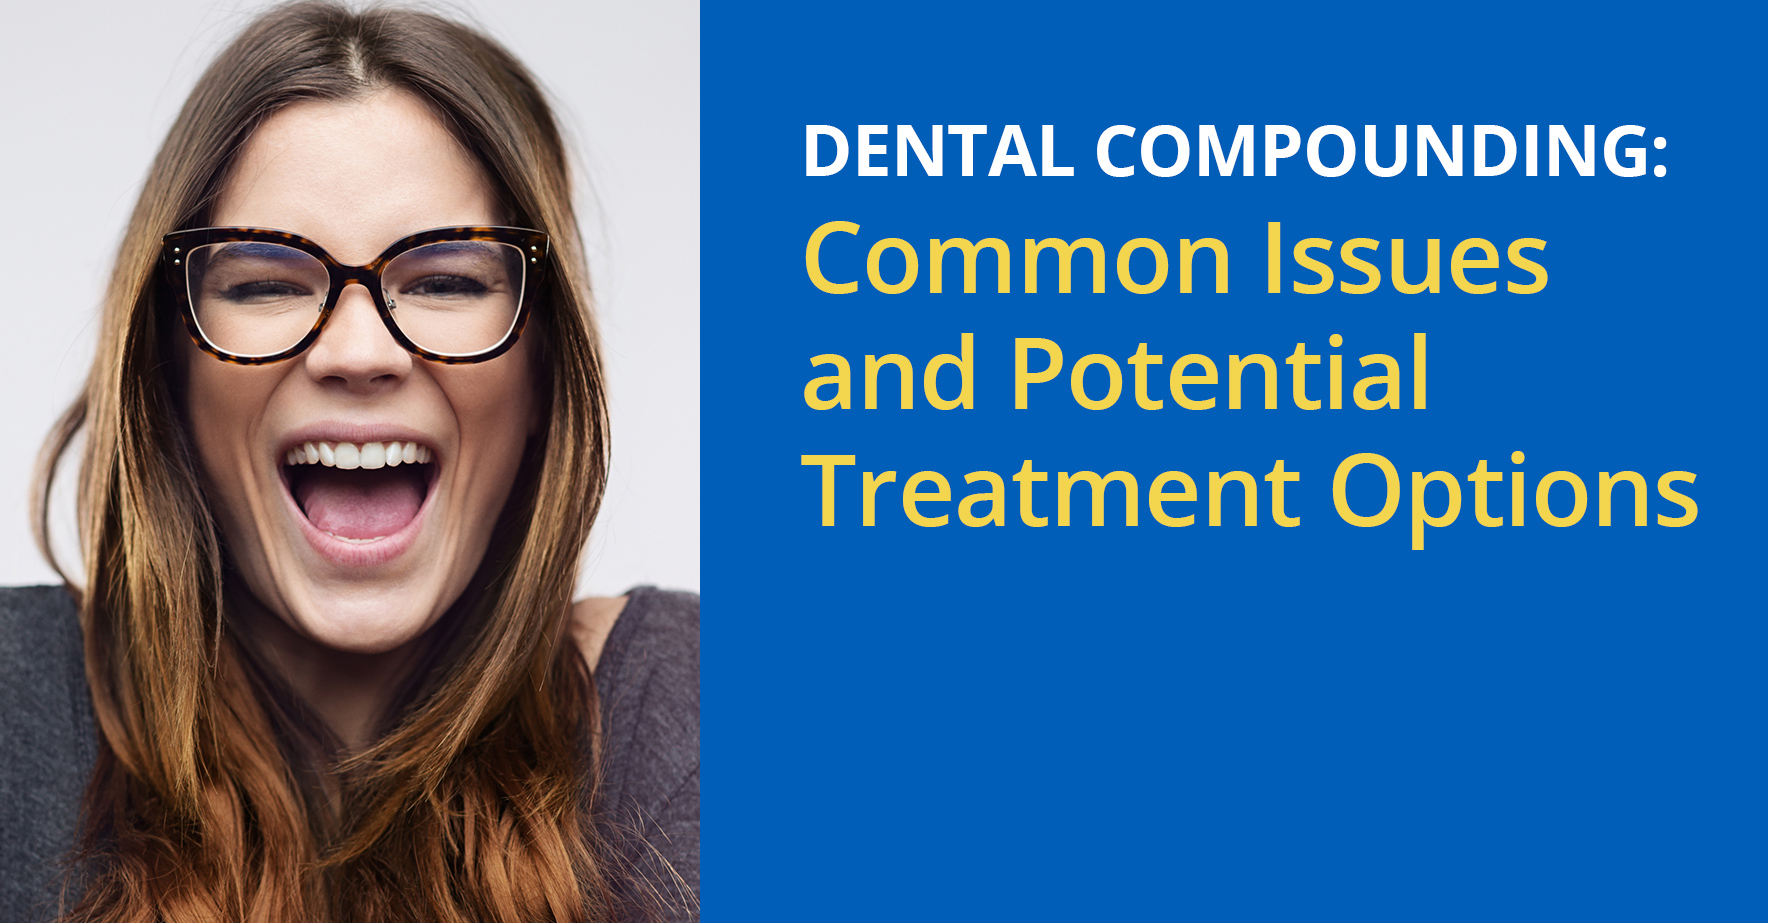 dental_compounding_common_issues_and_potential_treatment_options.jpg.